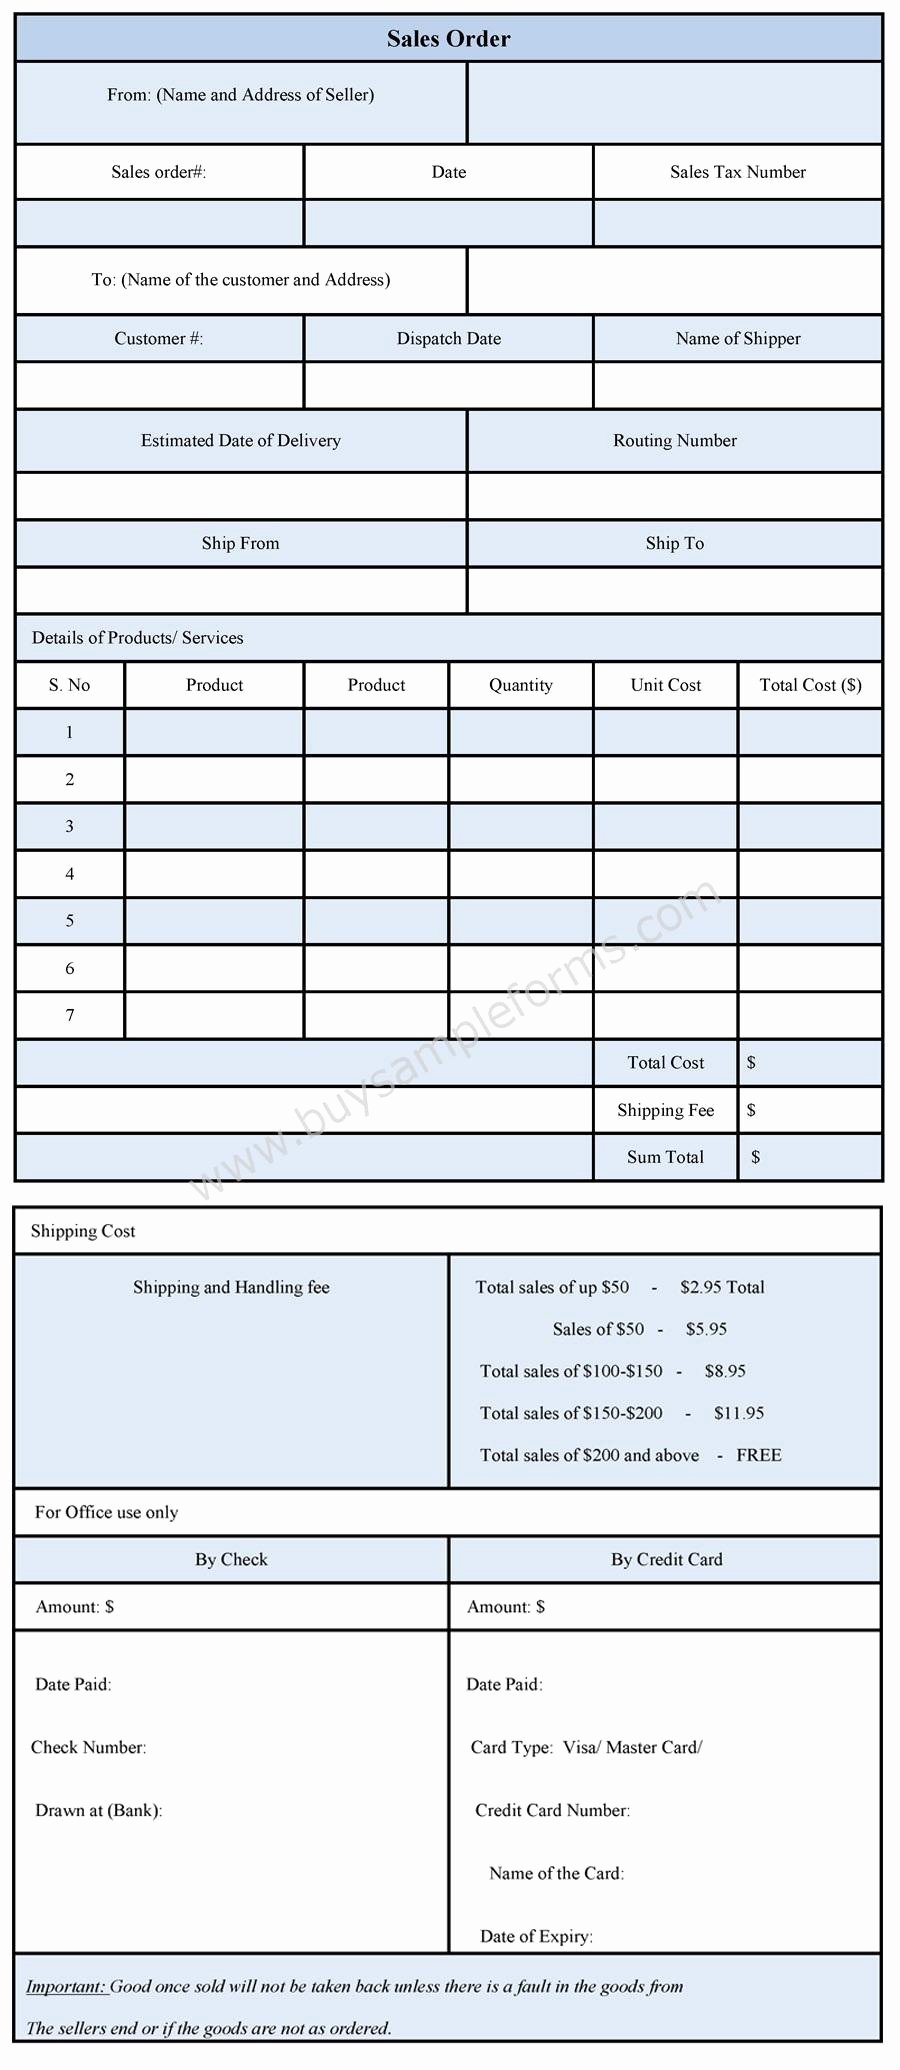 Sale order form Template Beautiful Sales order form